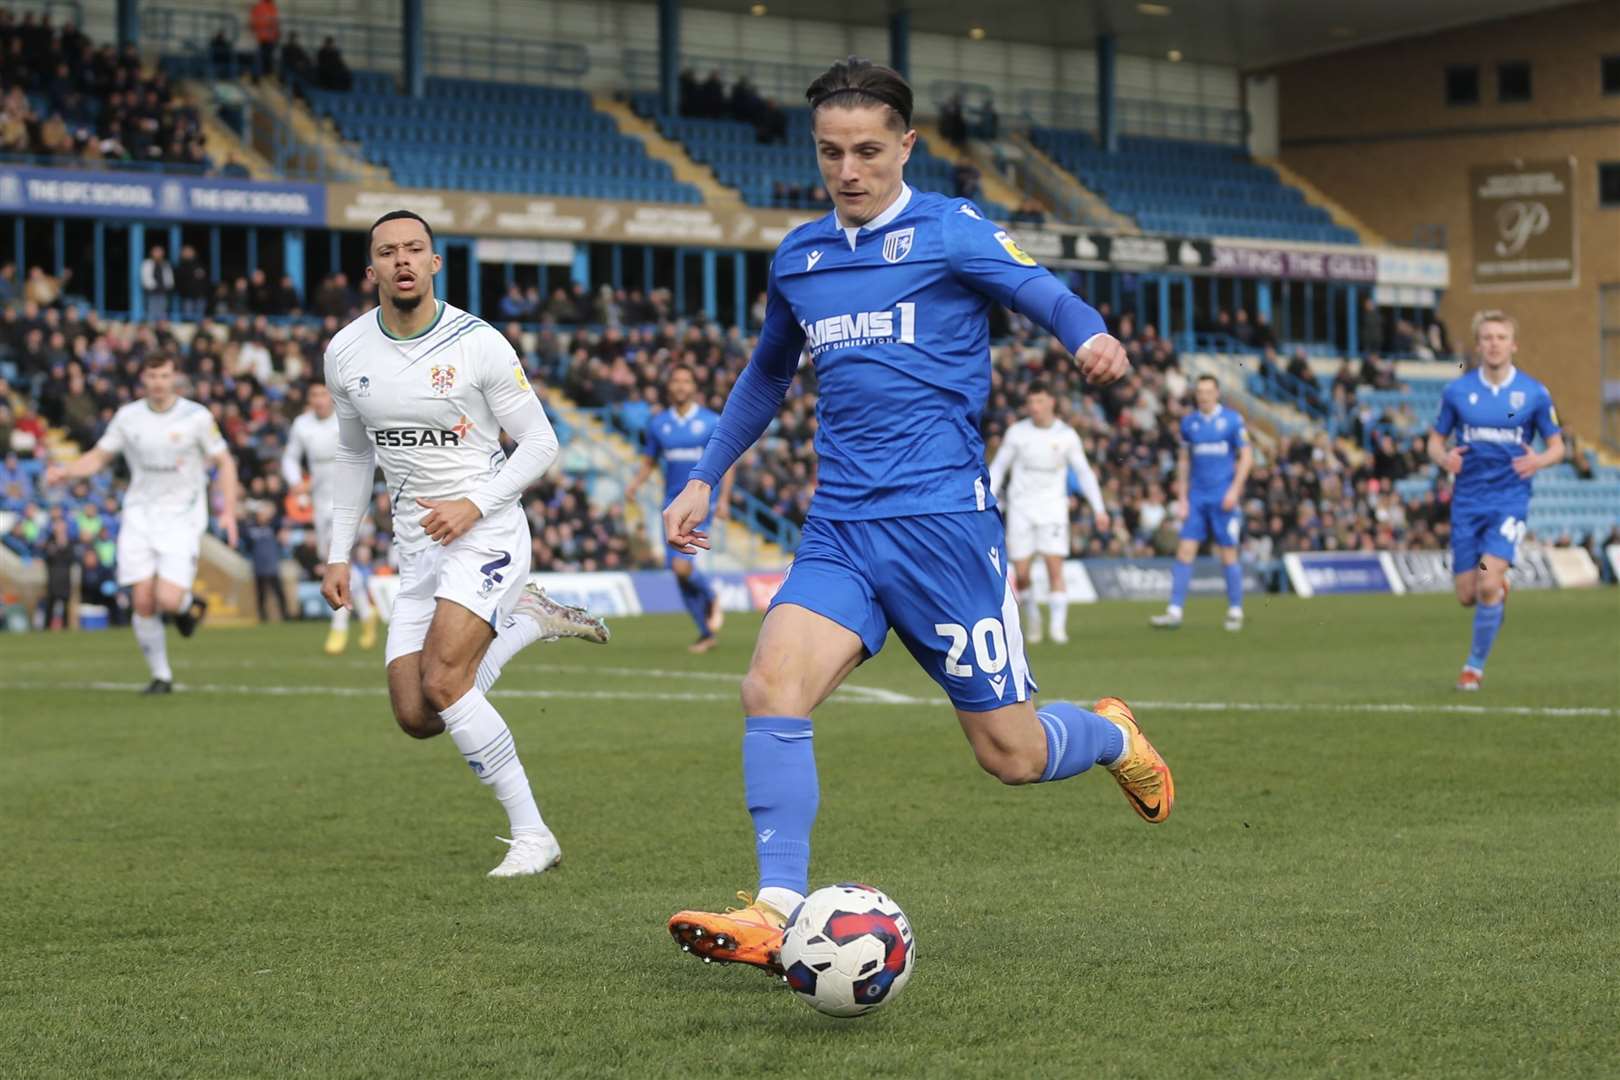 Tom Nichols in action for the Gills against Tranmere